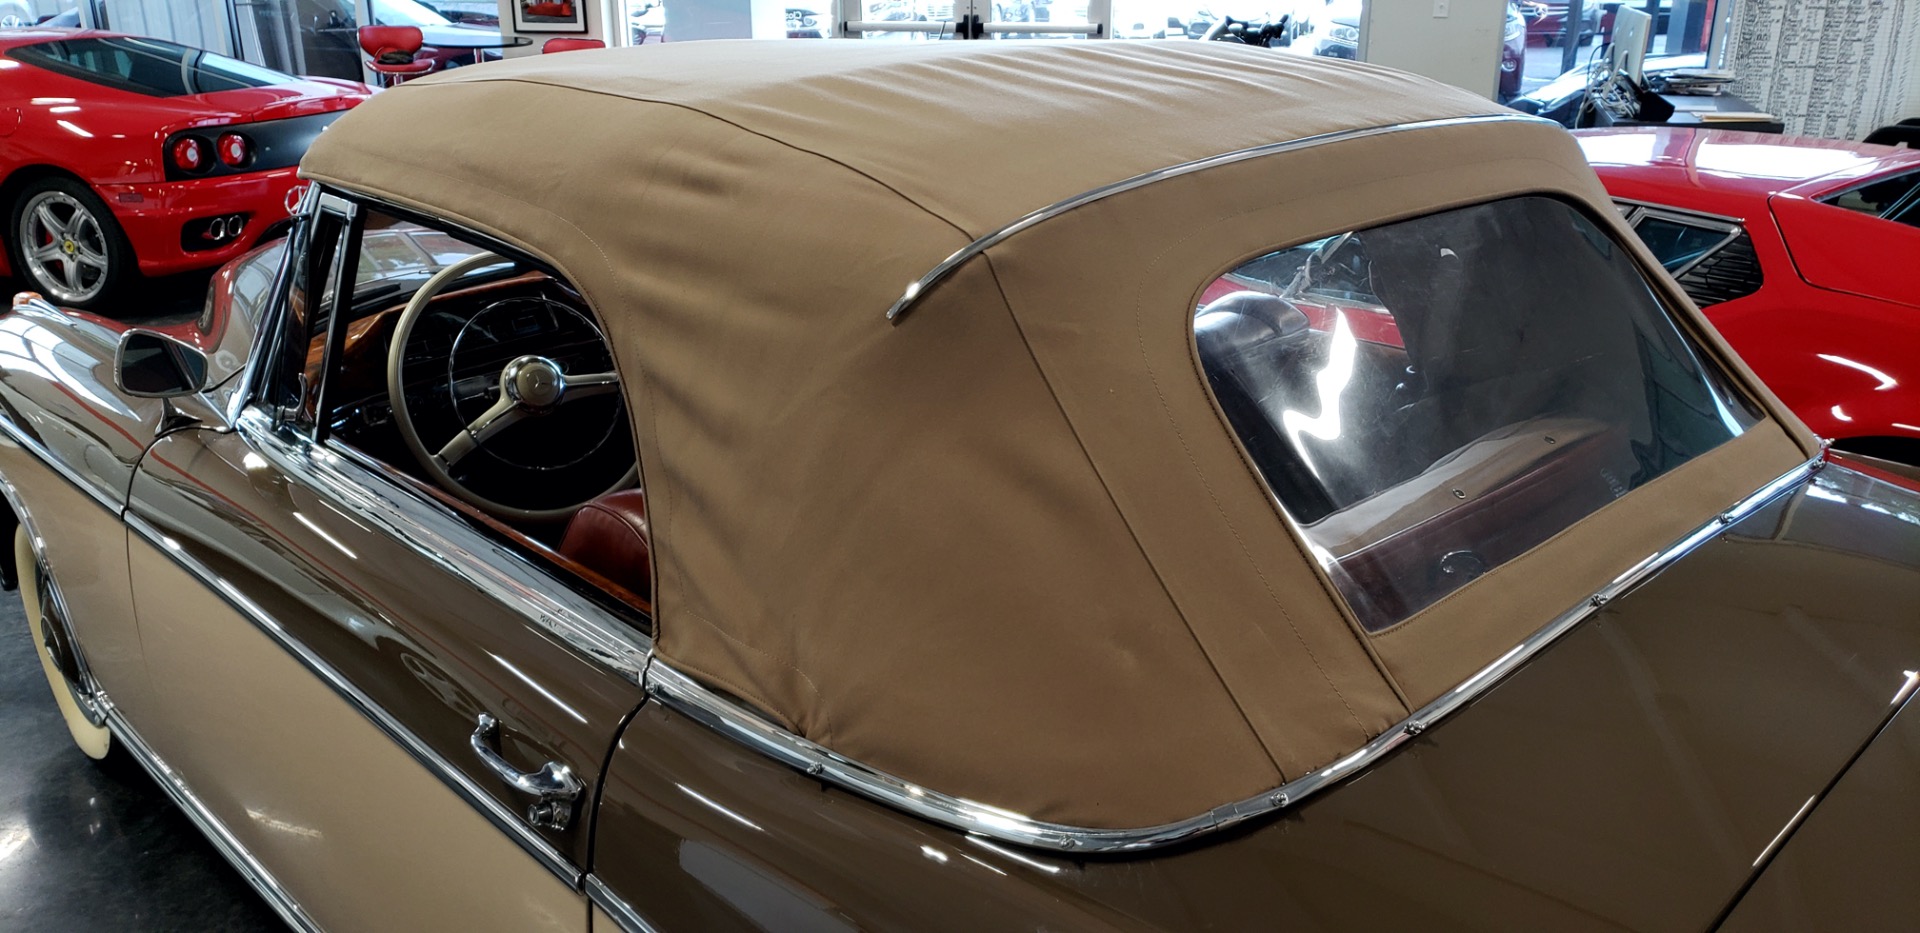 Used 1957 Mercedes-Benz 220 S Cabriolet - Full Restoration for sale Sold at Formula Imports in Charlotte NC 28227 17